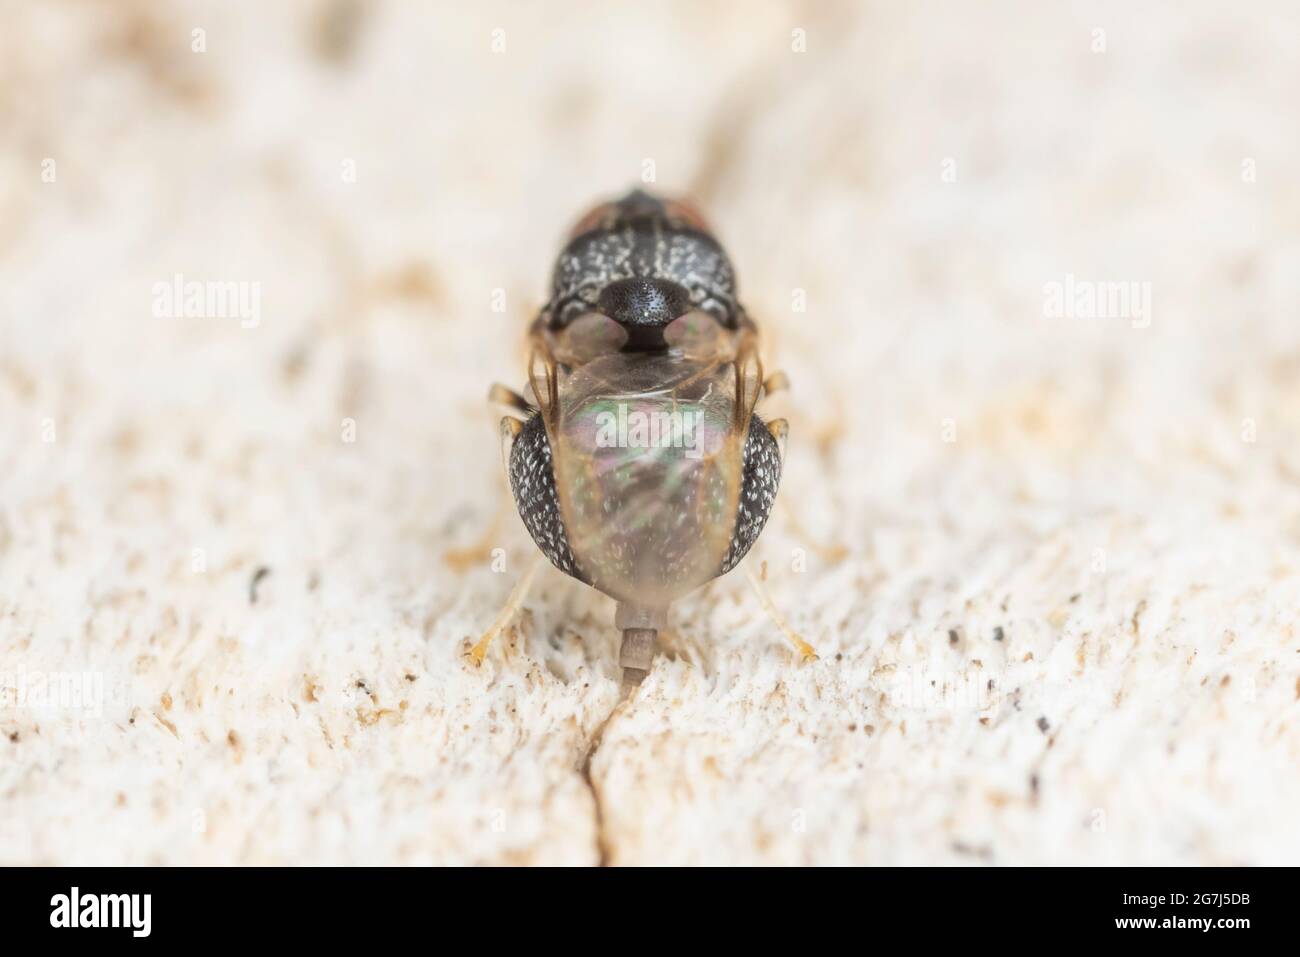 A female Solider Fly (Gowdeyana punctifera) ovipositing on the side of a dead oak tree. Stock Photo